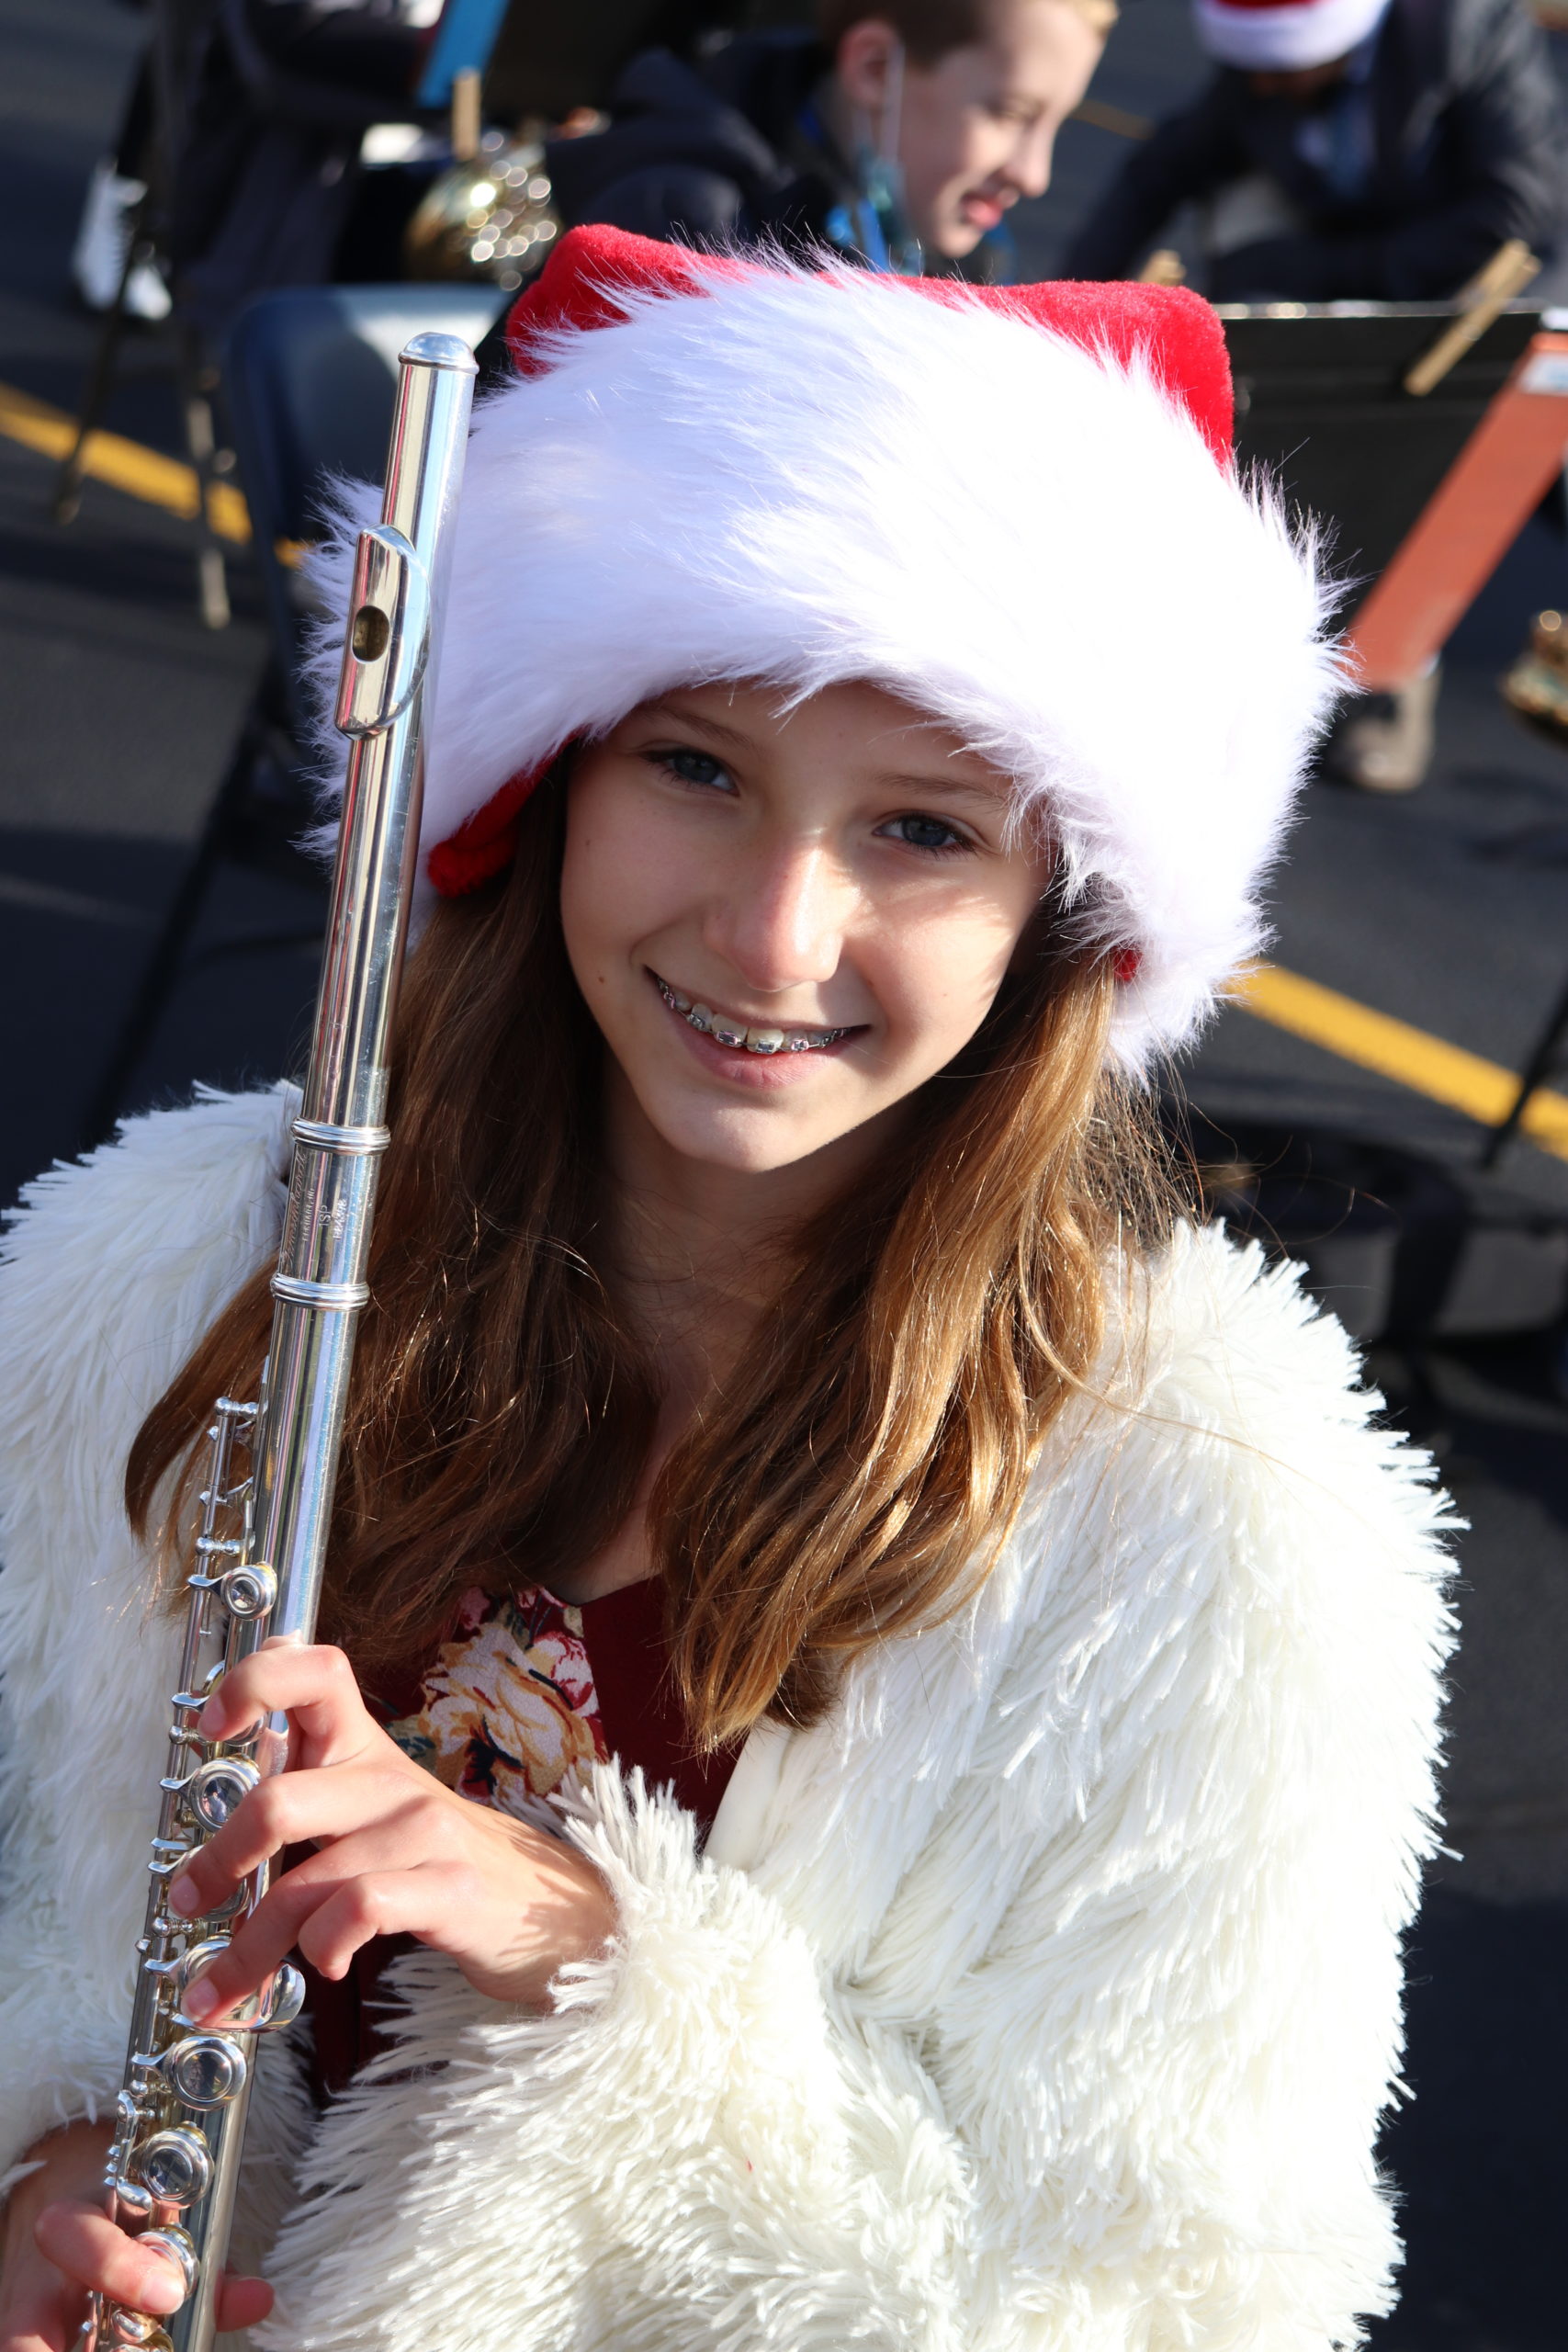 Raynor Country Day School recently hosted a series of winter concerts showcasing the vocal and instrumental talents of students. Sixth-grader Isabelle Grucci-Petersen prepares to perform.